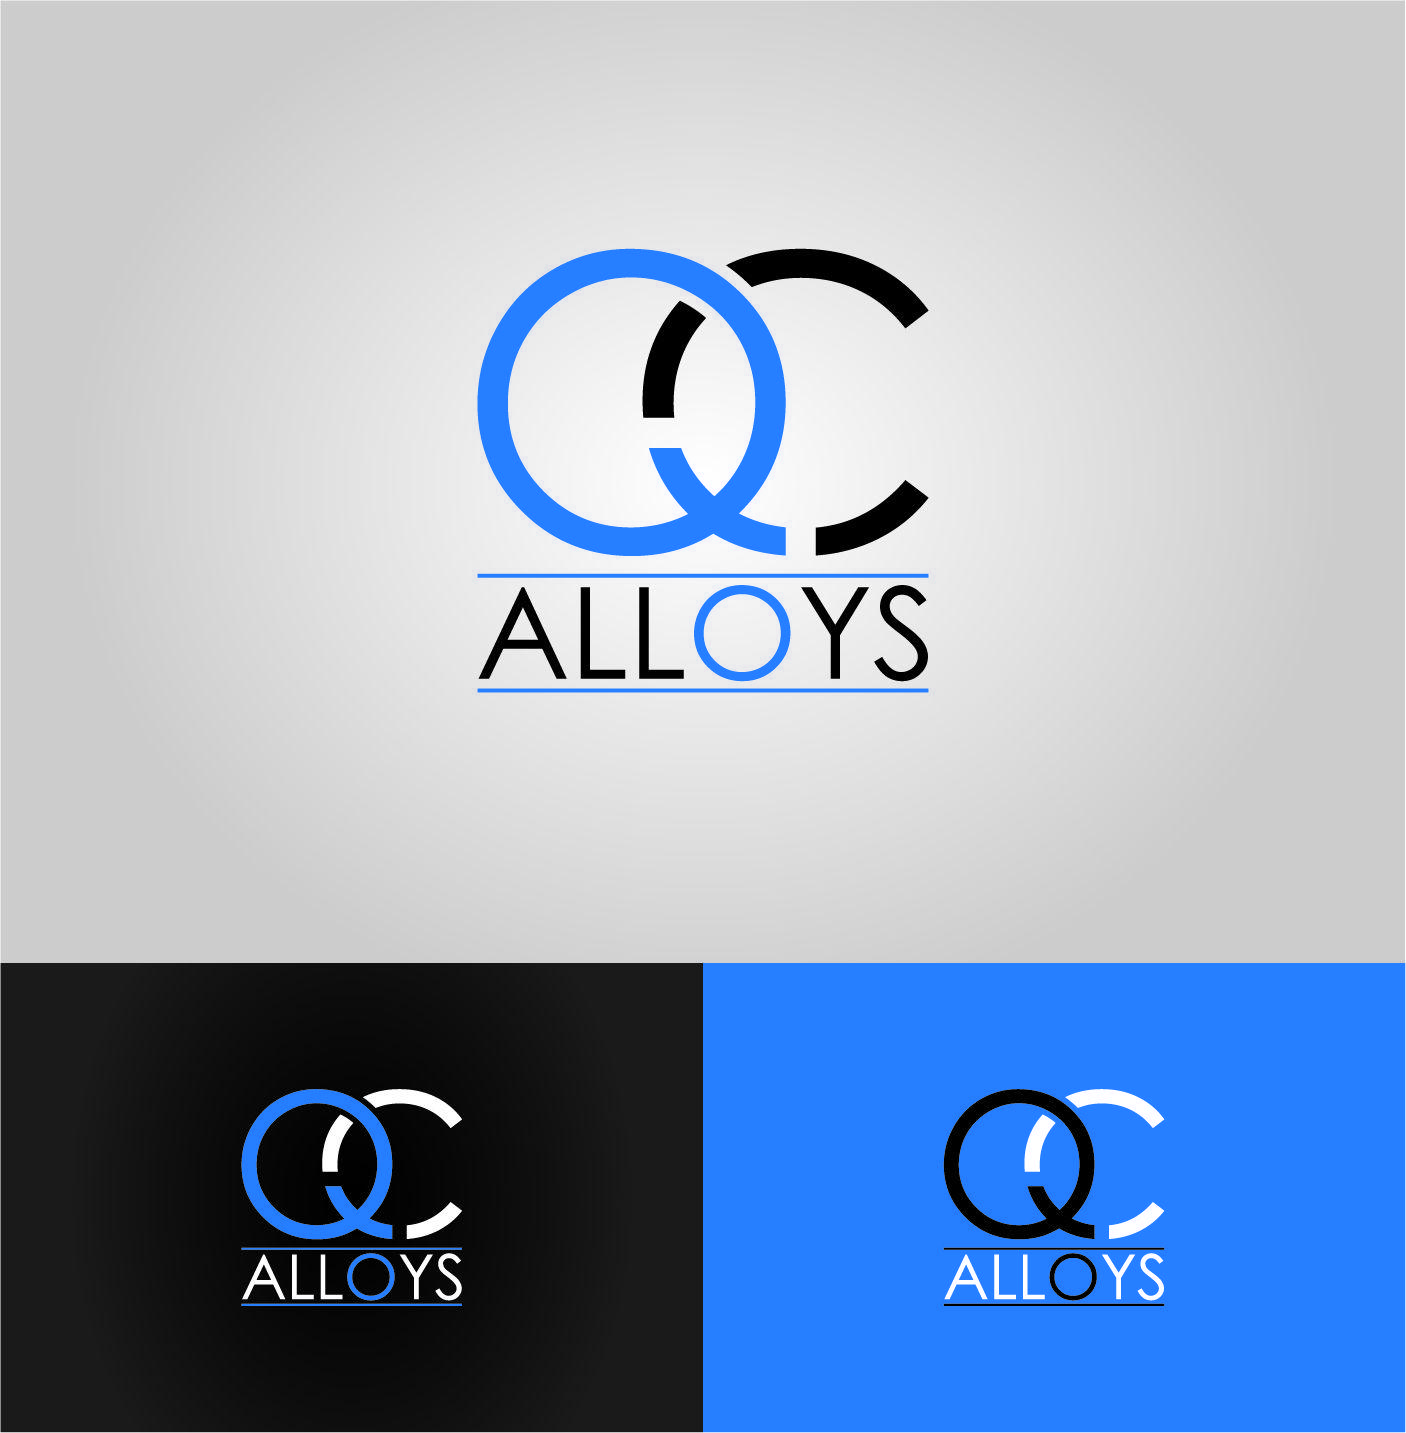 QC Logo - Bold, Serious, Oil And Gas Logo Design for QC Alloys by JE Designs ...